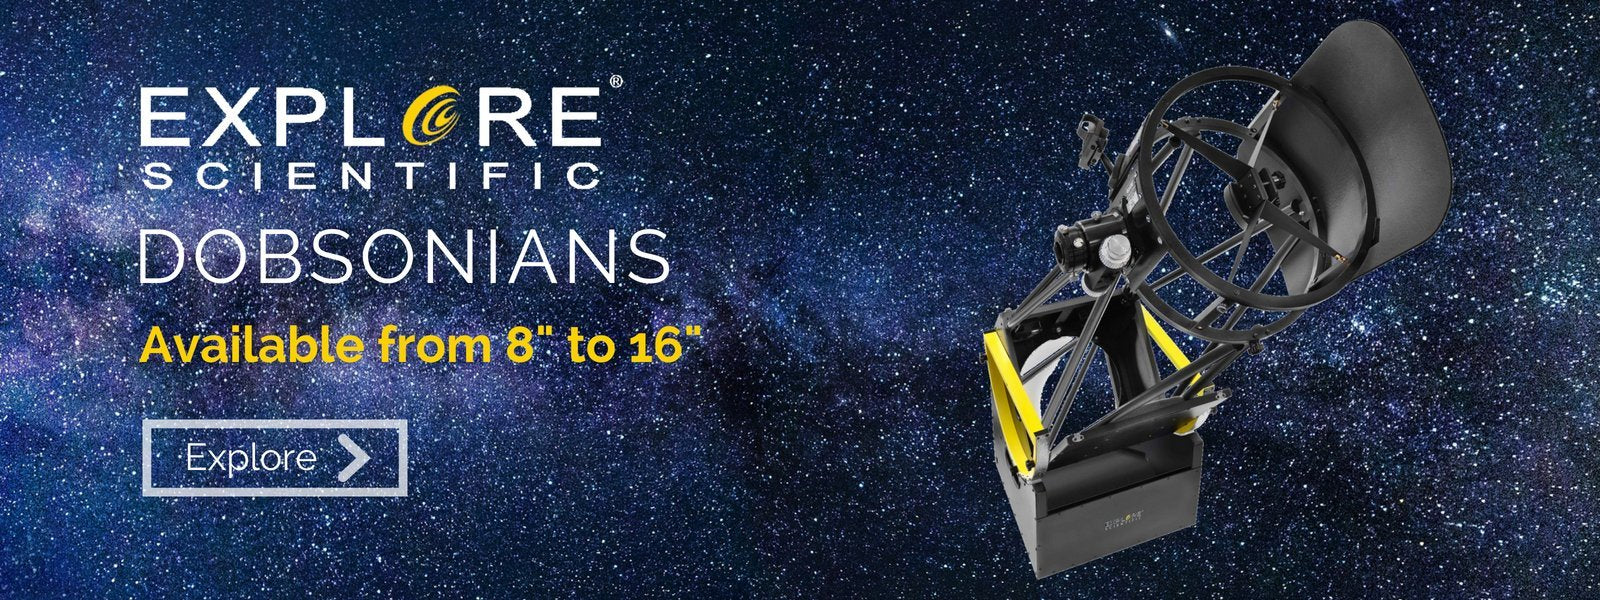 best place to buy telescopes online